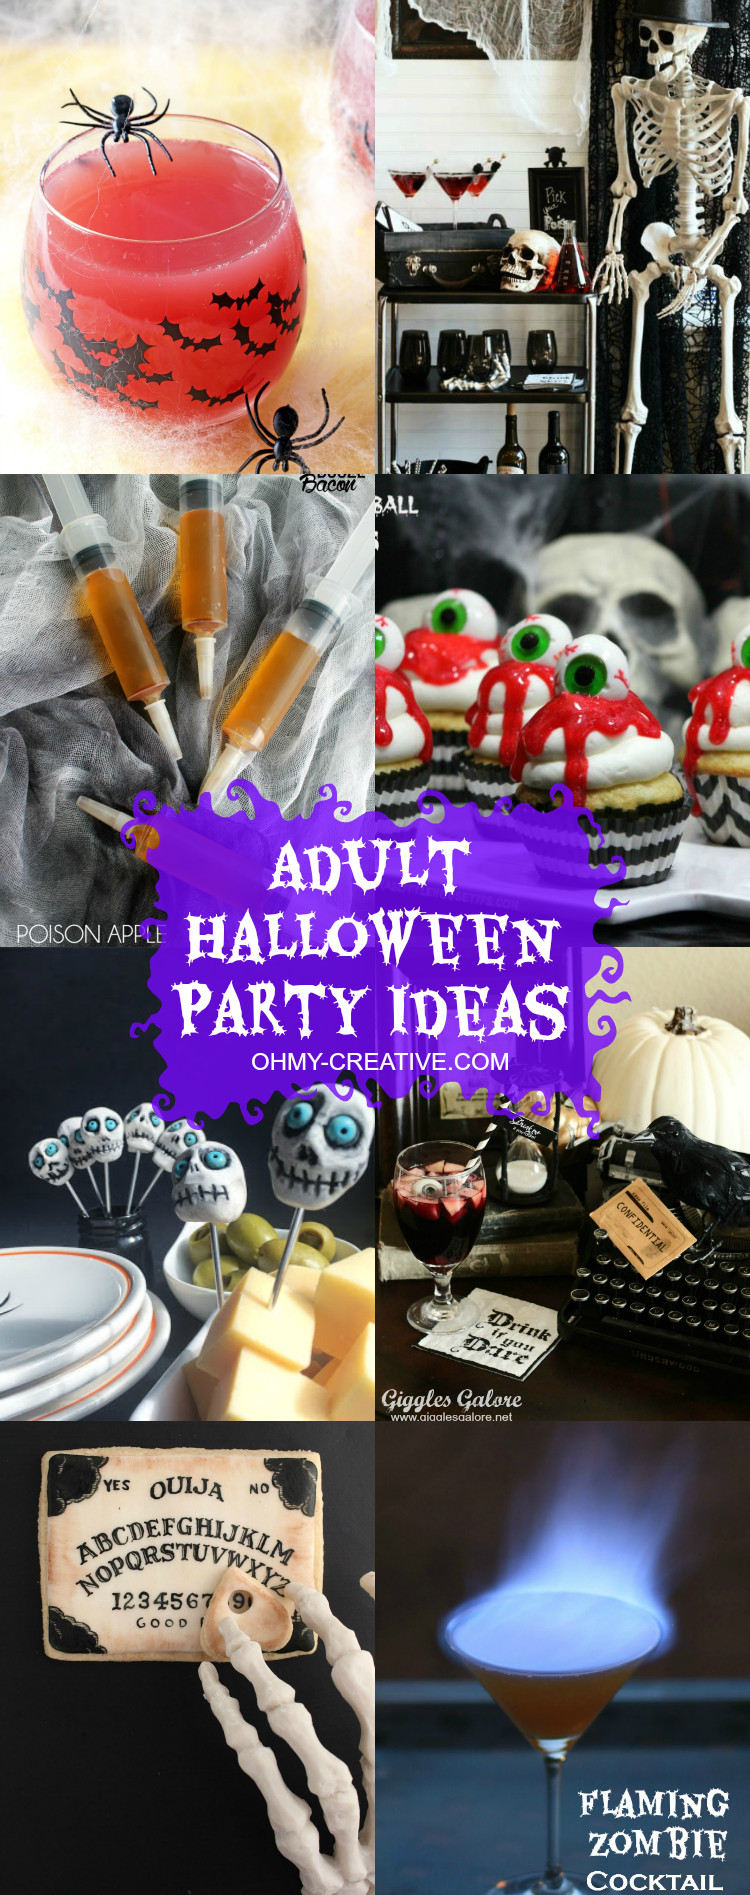 Halloween Party Ideas For Adults Content
 Adult Halloween Party Ideas Oh My Creative